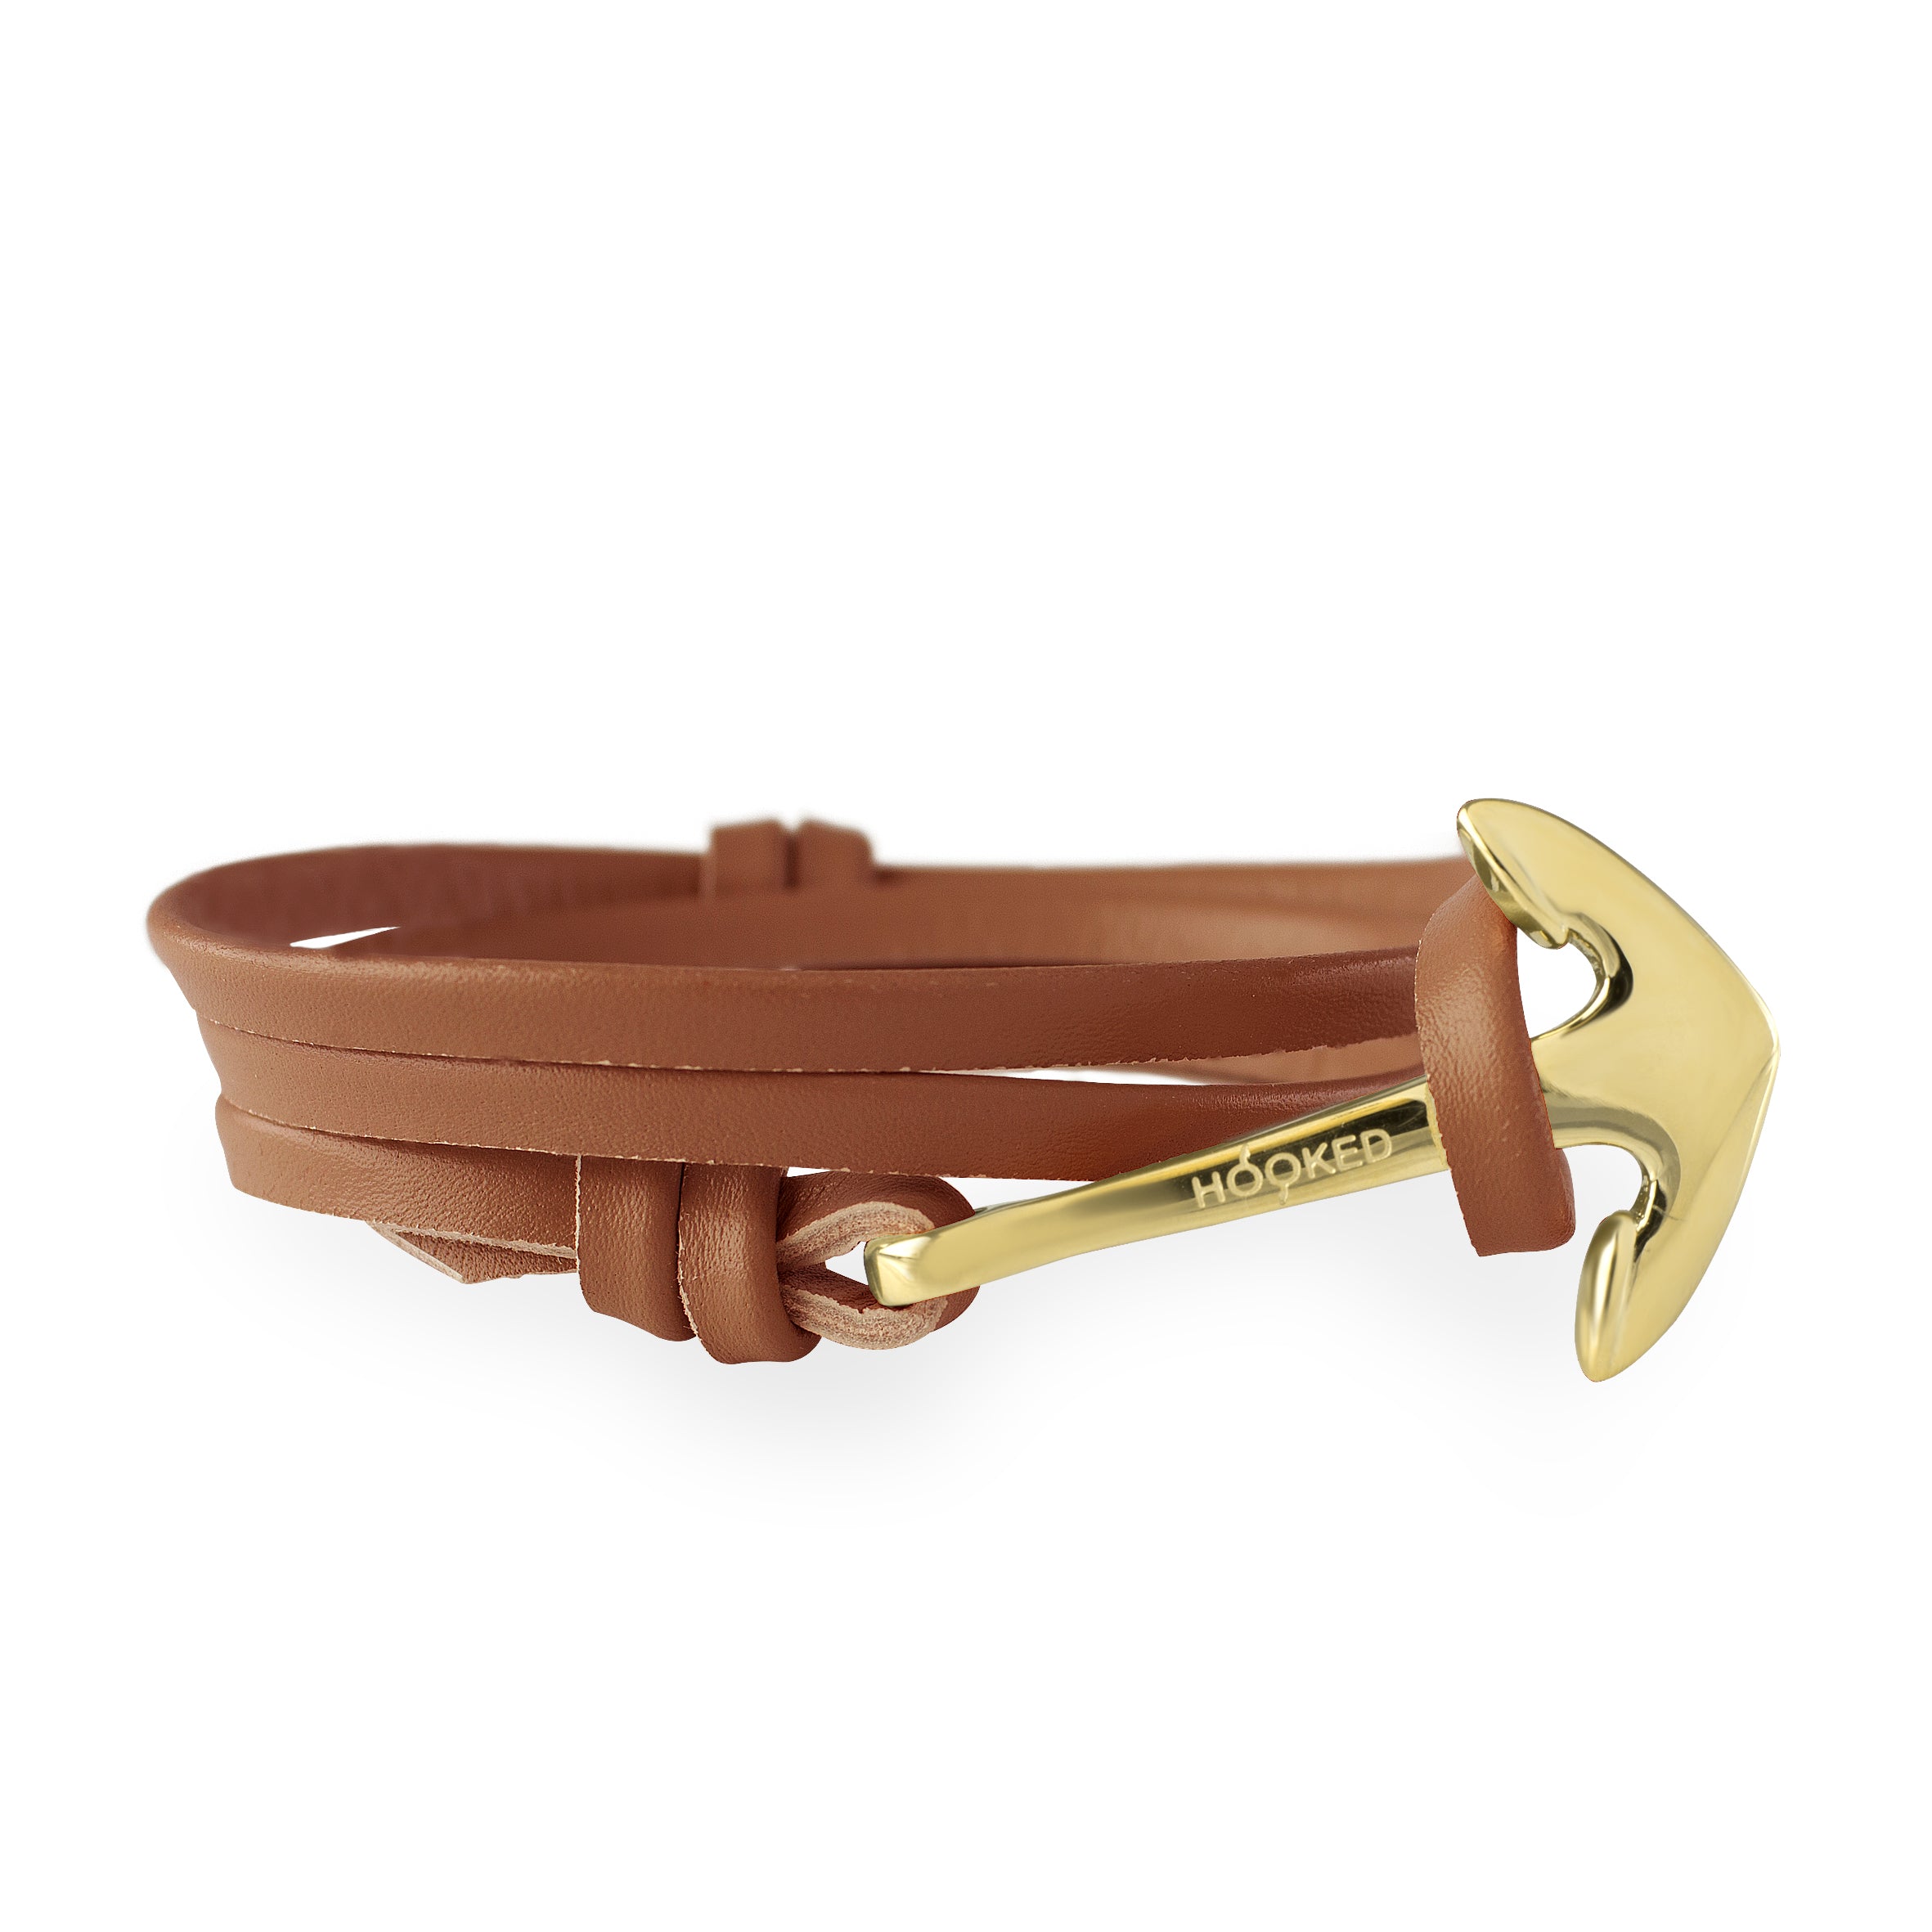 – Anchor Cognac Wrap Leather Concepts Hooked